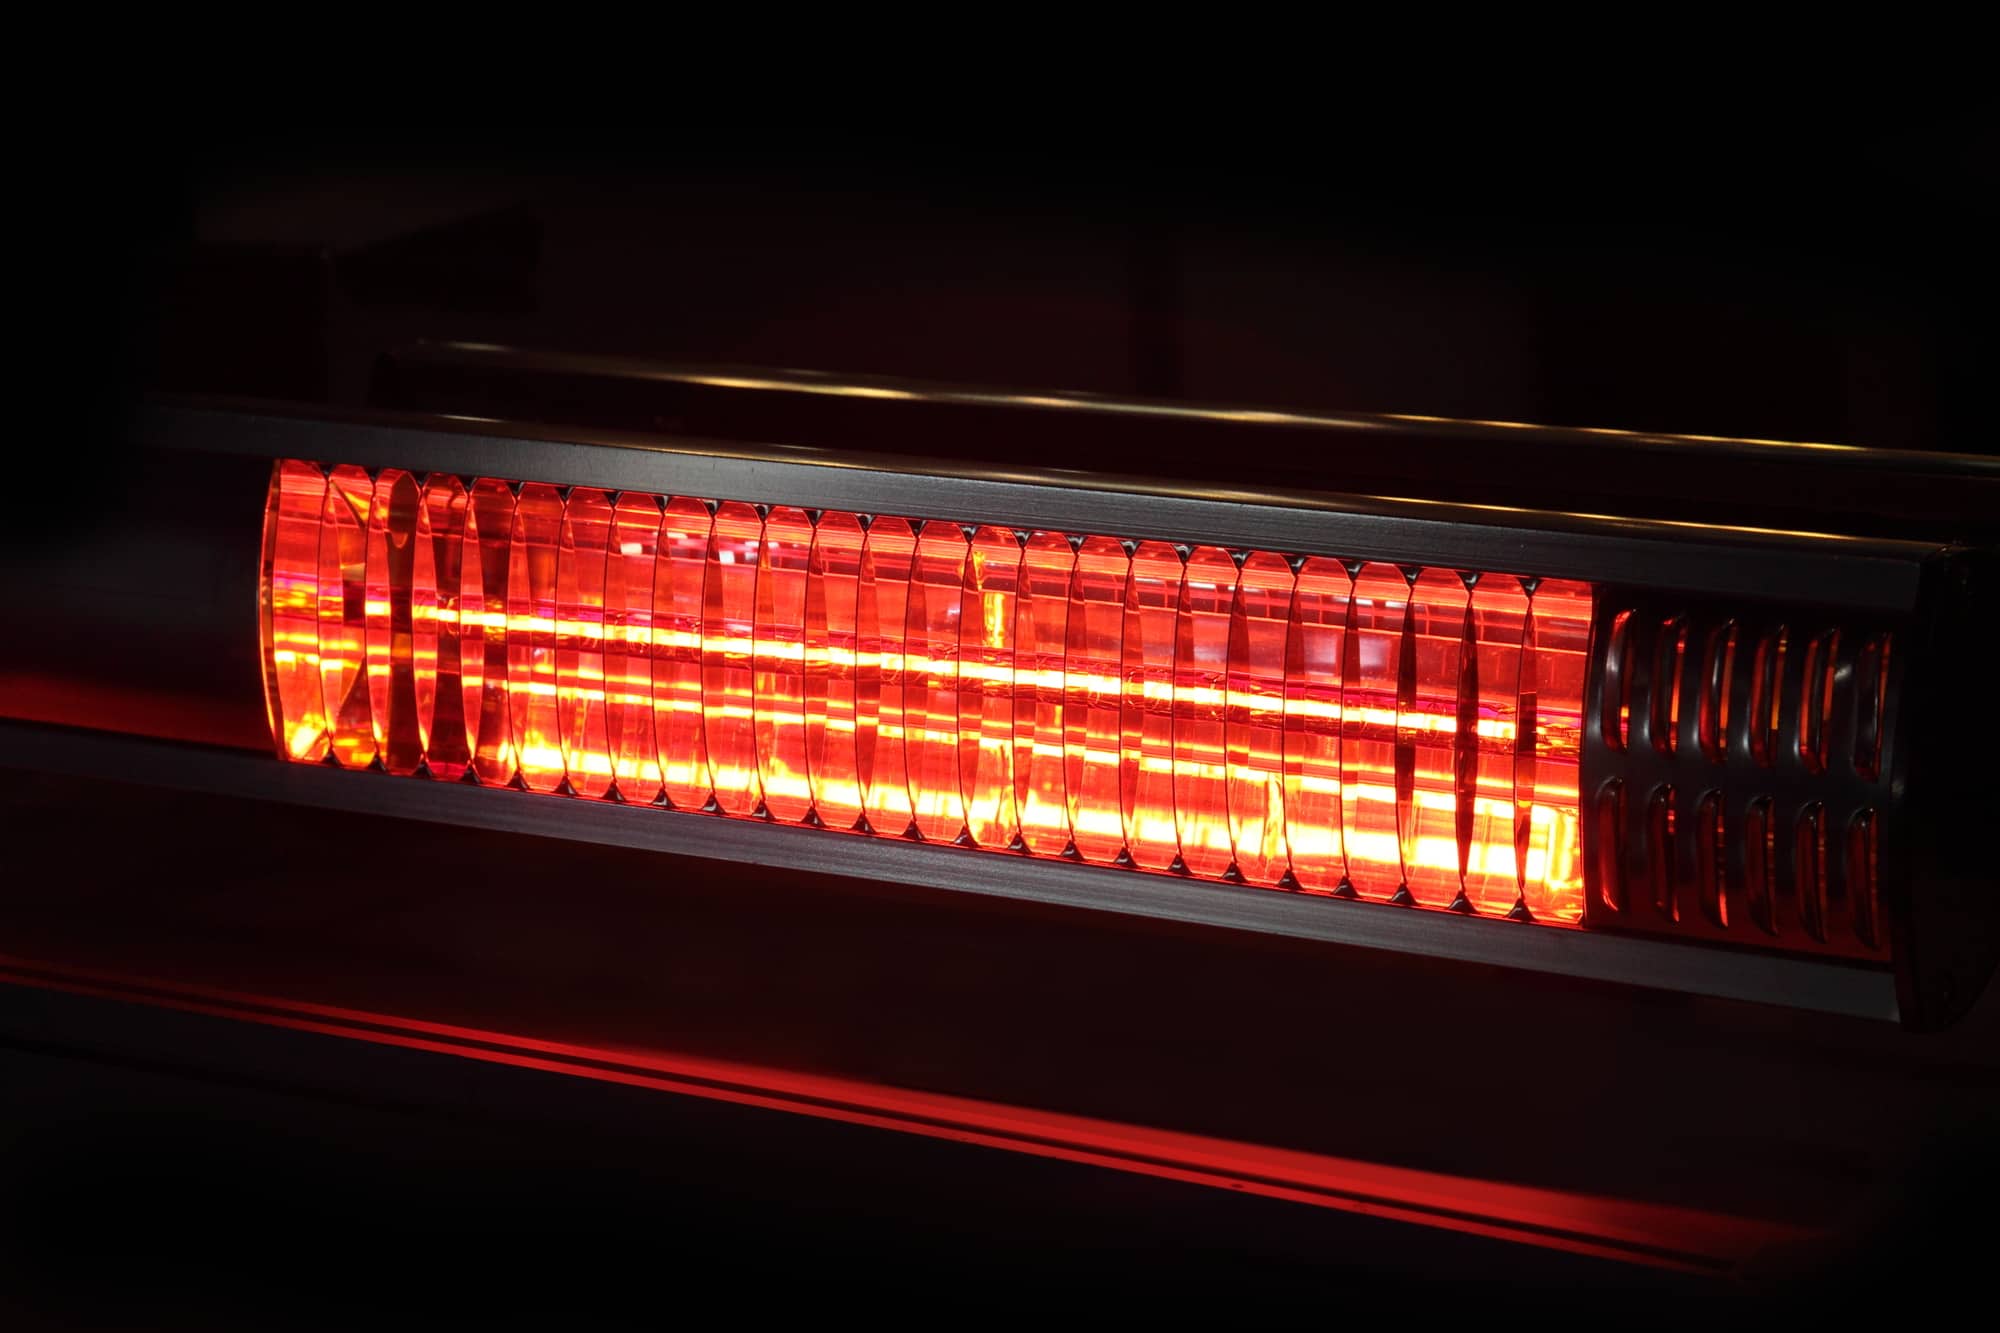 electric infrared heater on a black background